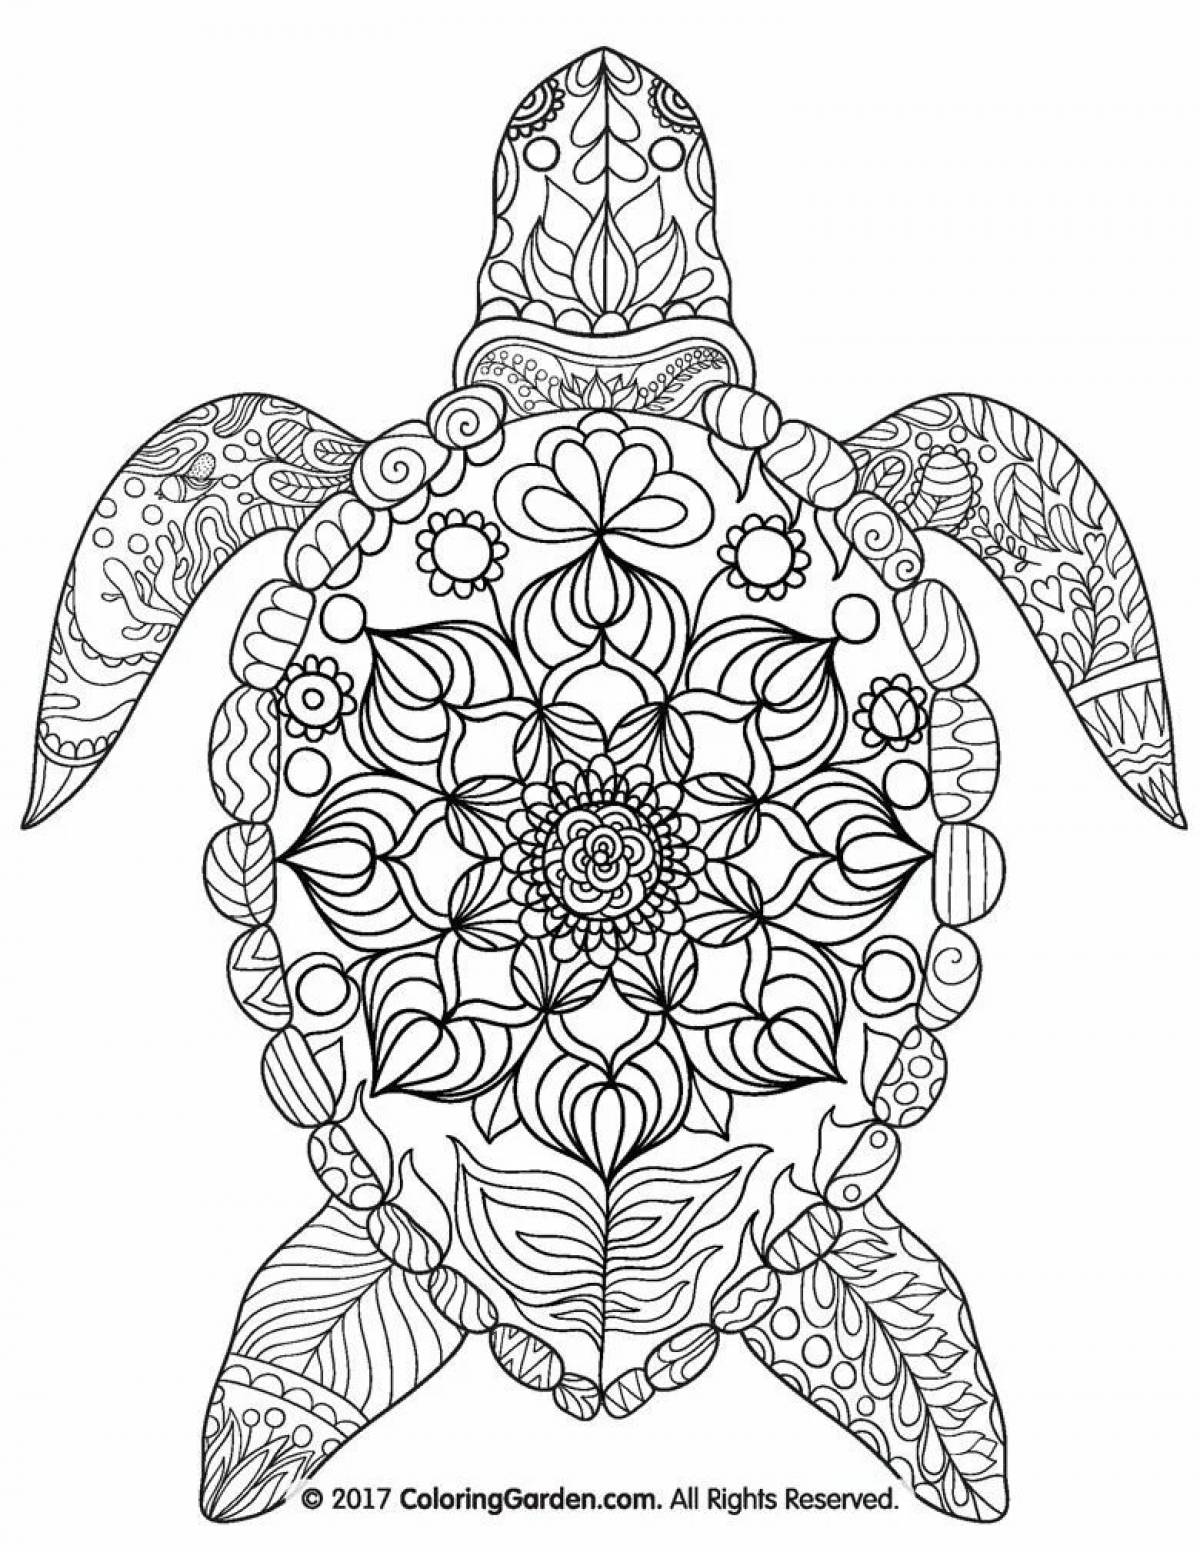 Unwinding coloring book to relax the nervous system